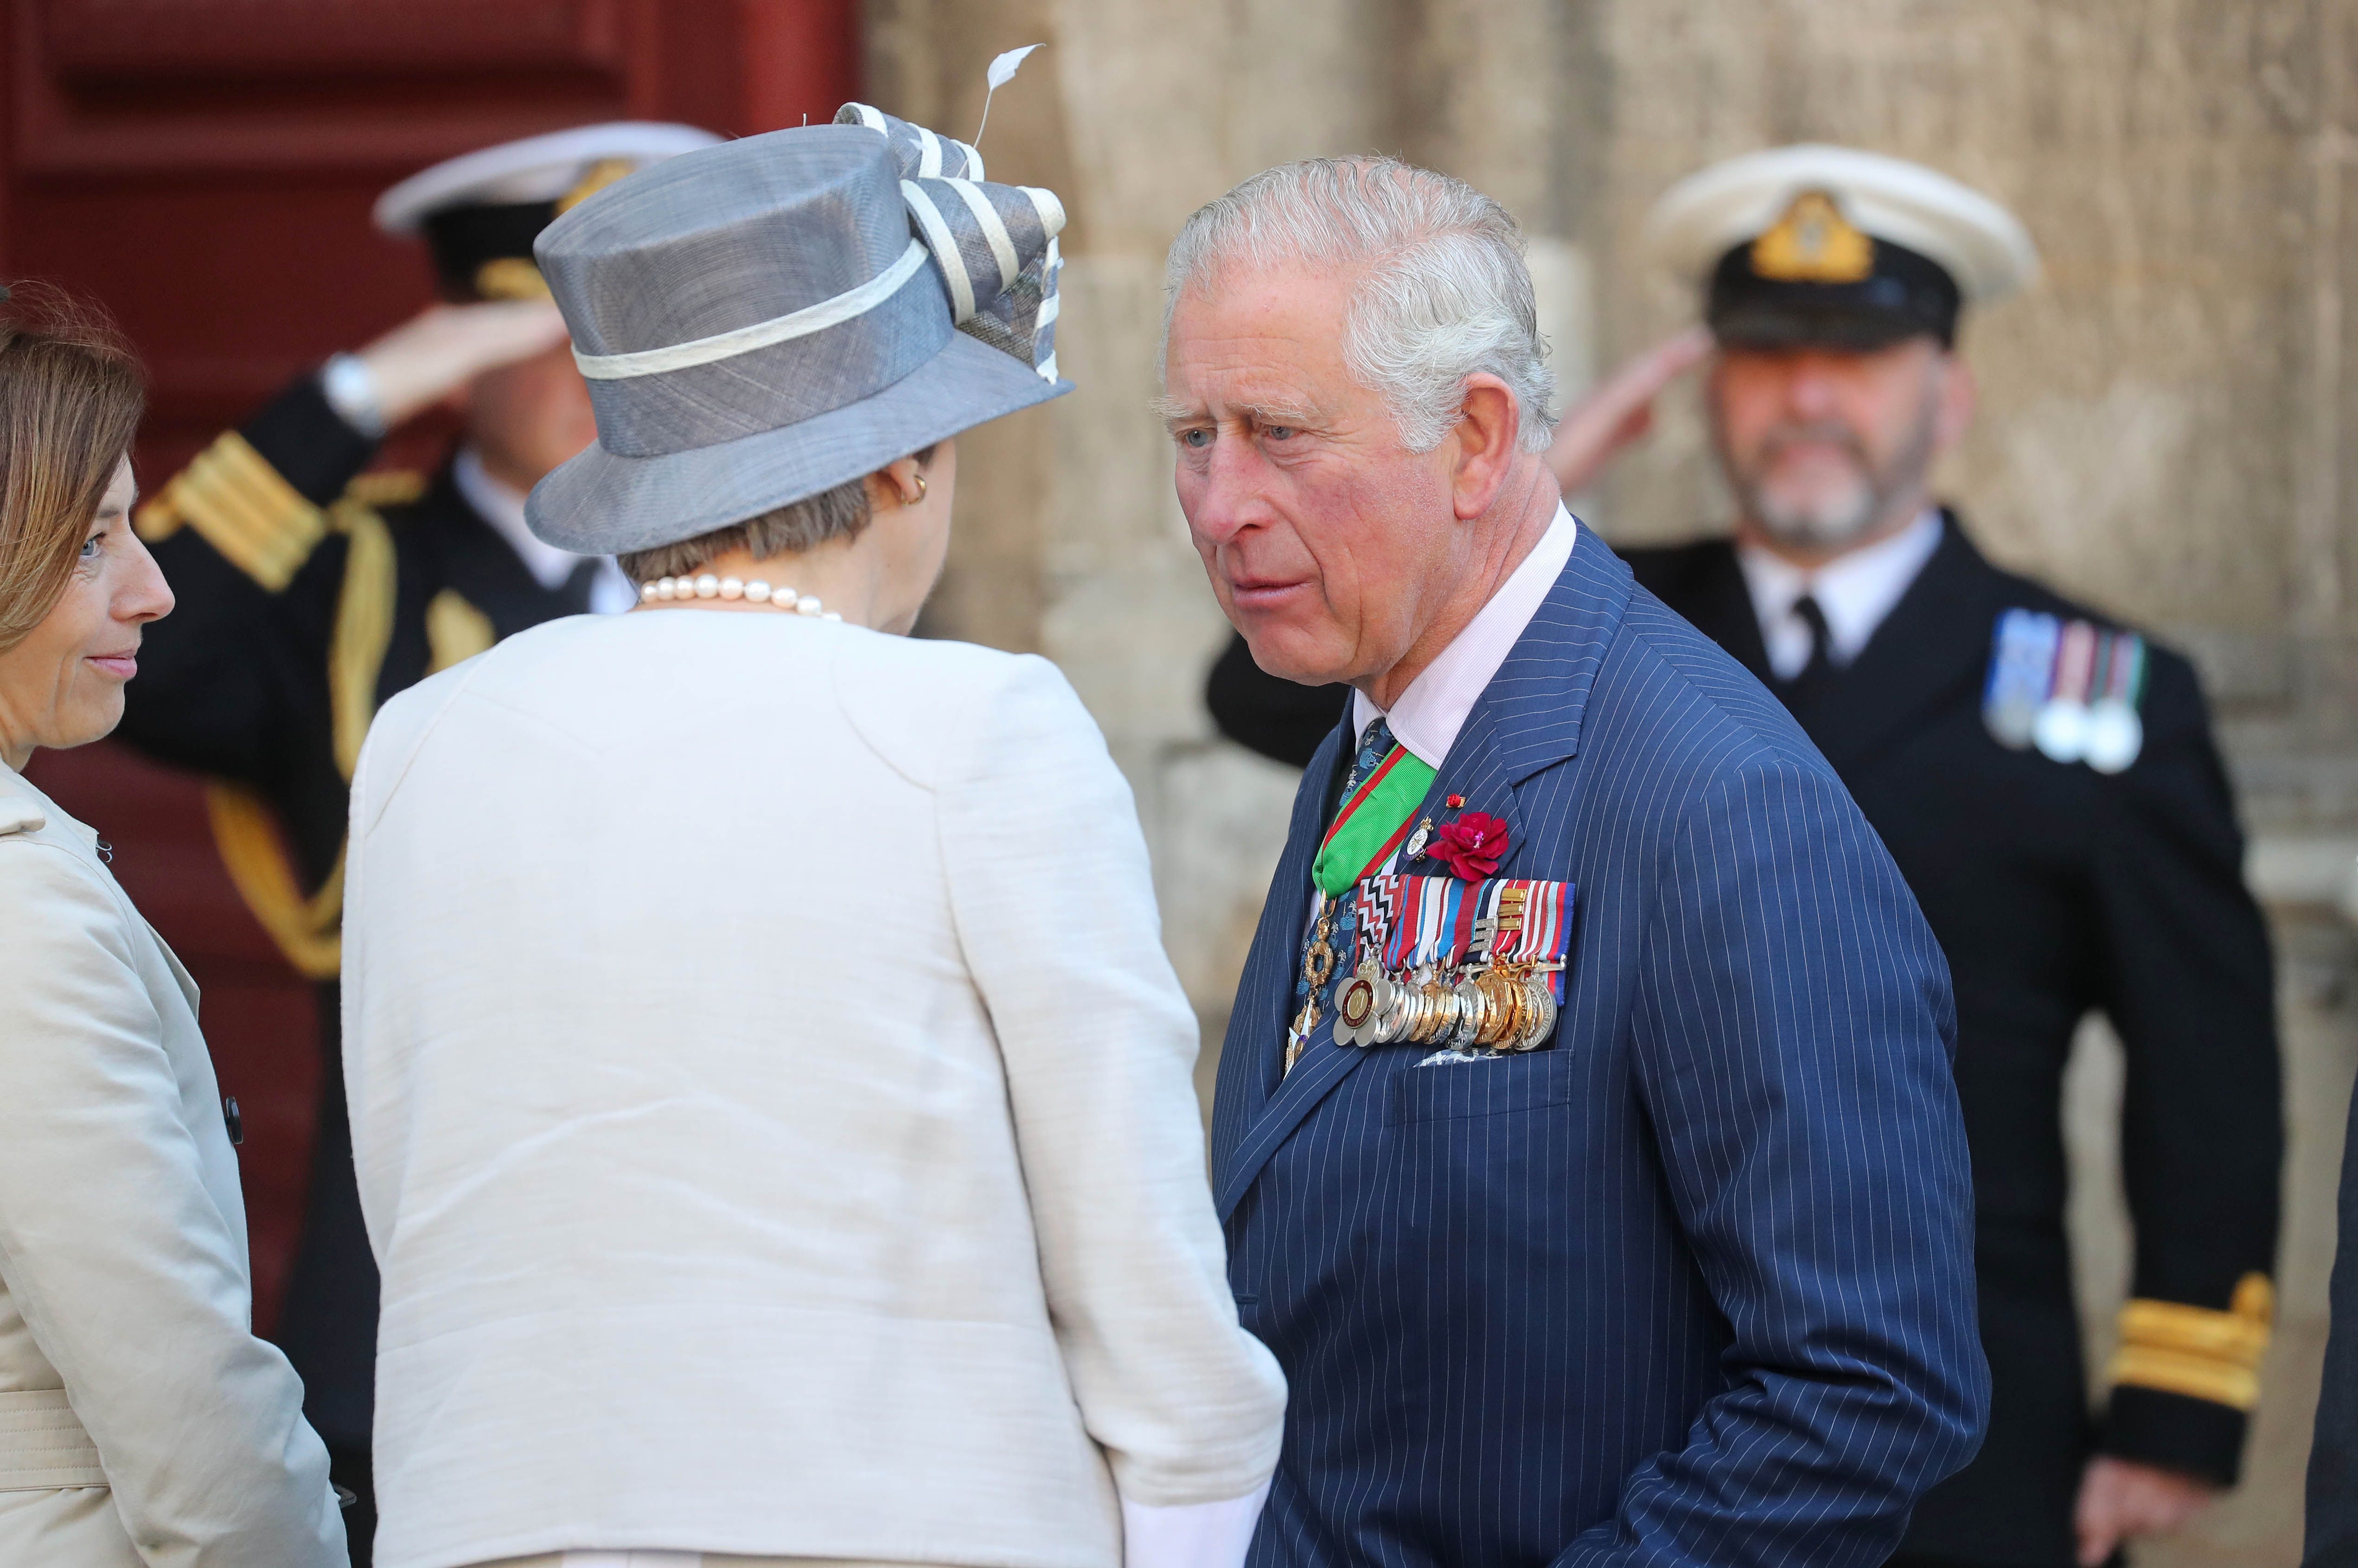 Britain's Prime Minister, Theresa May greets Prince Charles, Prince of Wales outside Bayeux Cathedral on June 06, 2019 in Bayeux, France.